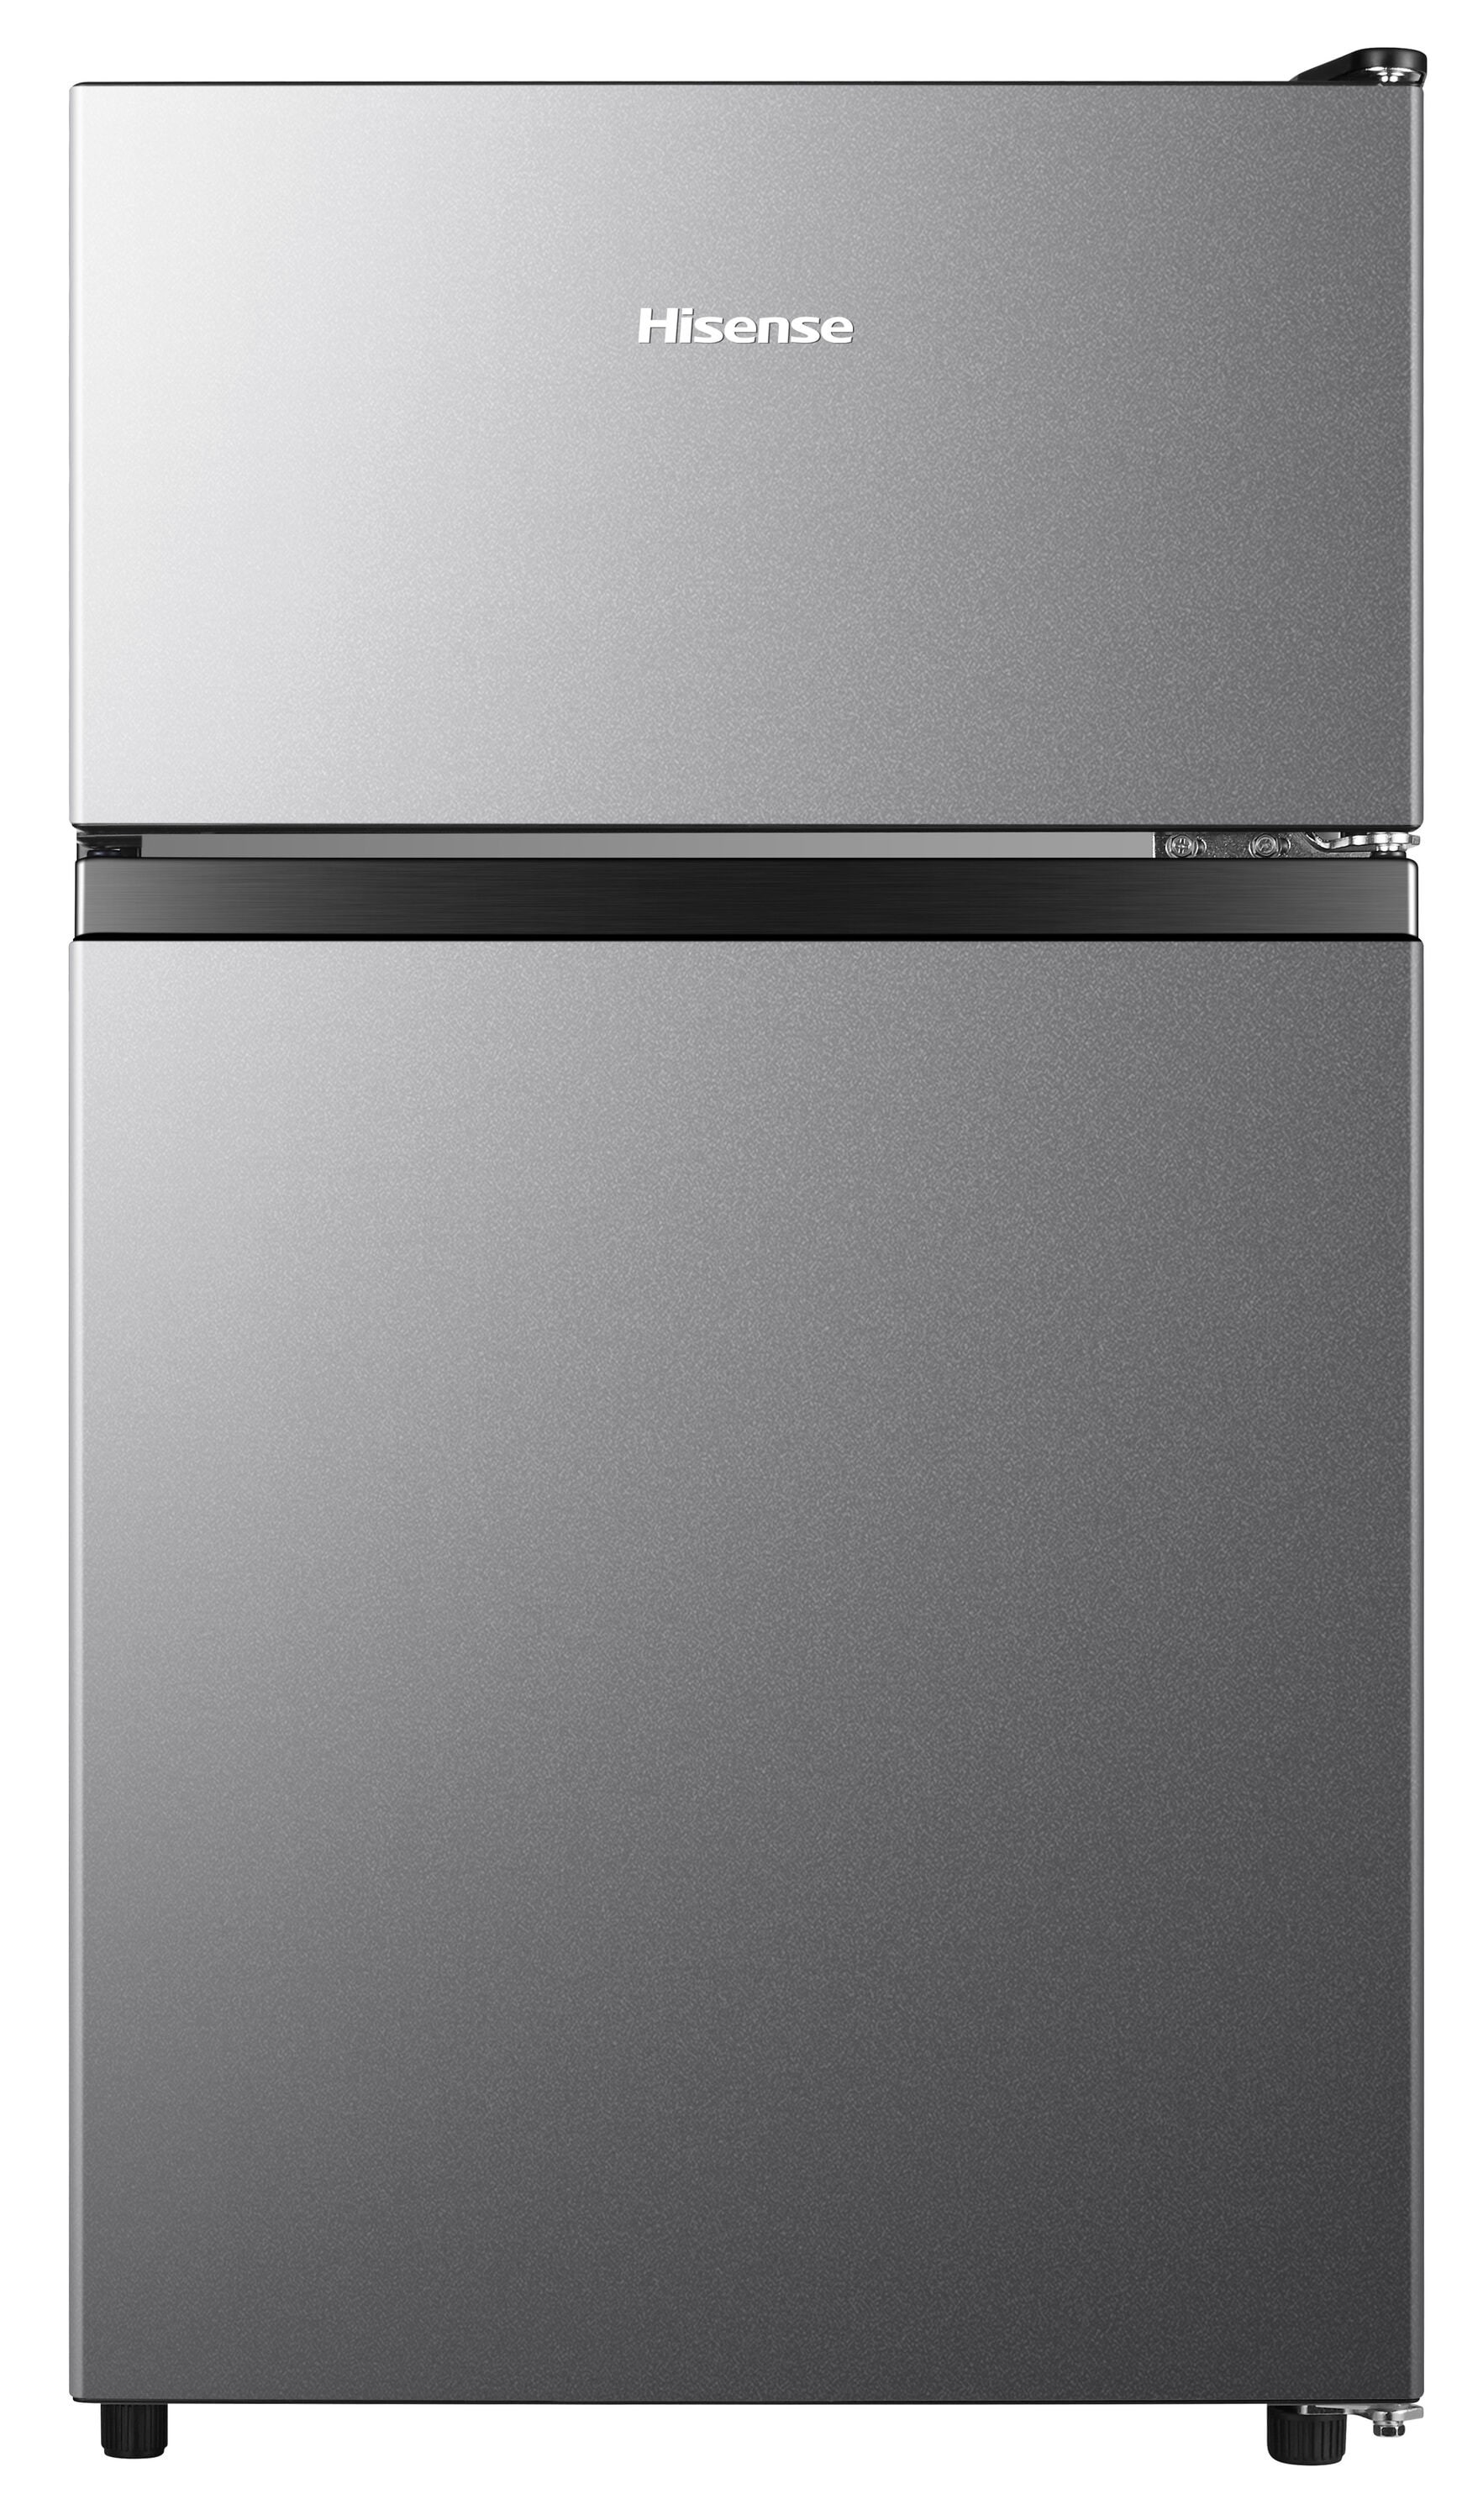 BLACK+DECKER 4.3 cu. ft. Mini Refrigerator With Freezer in Stainless Steel  Look BCRK43V - The Home Depot